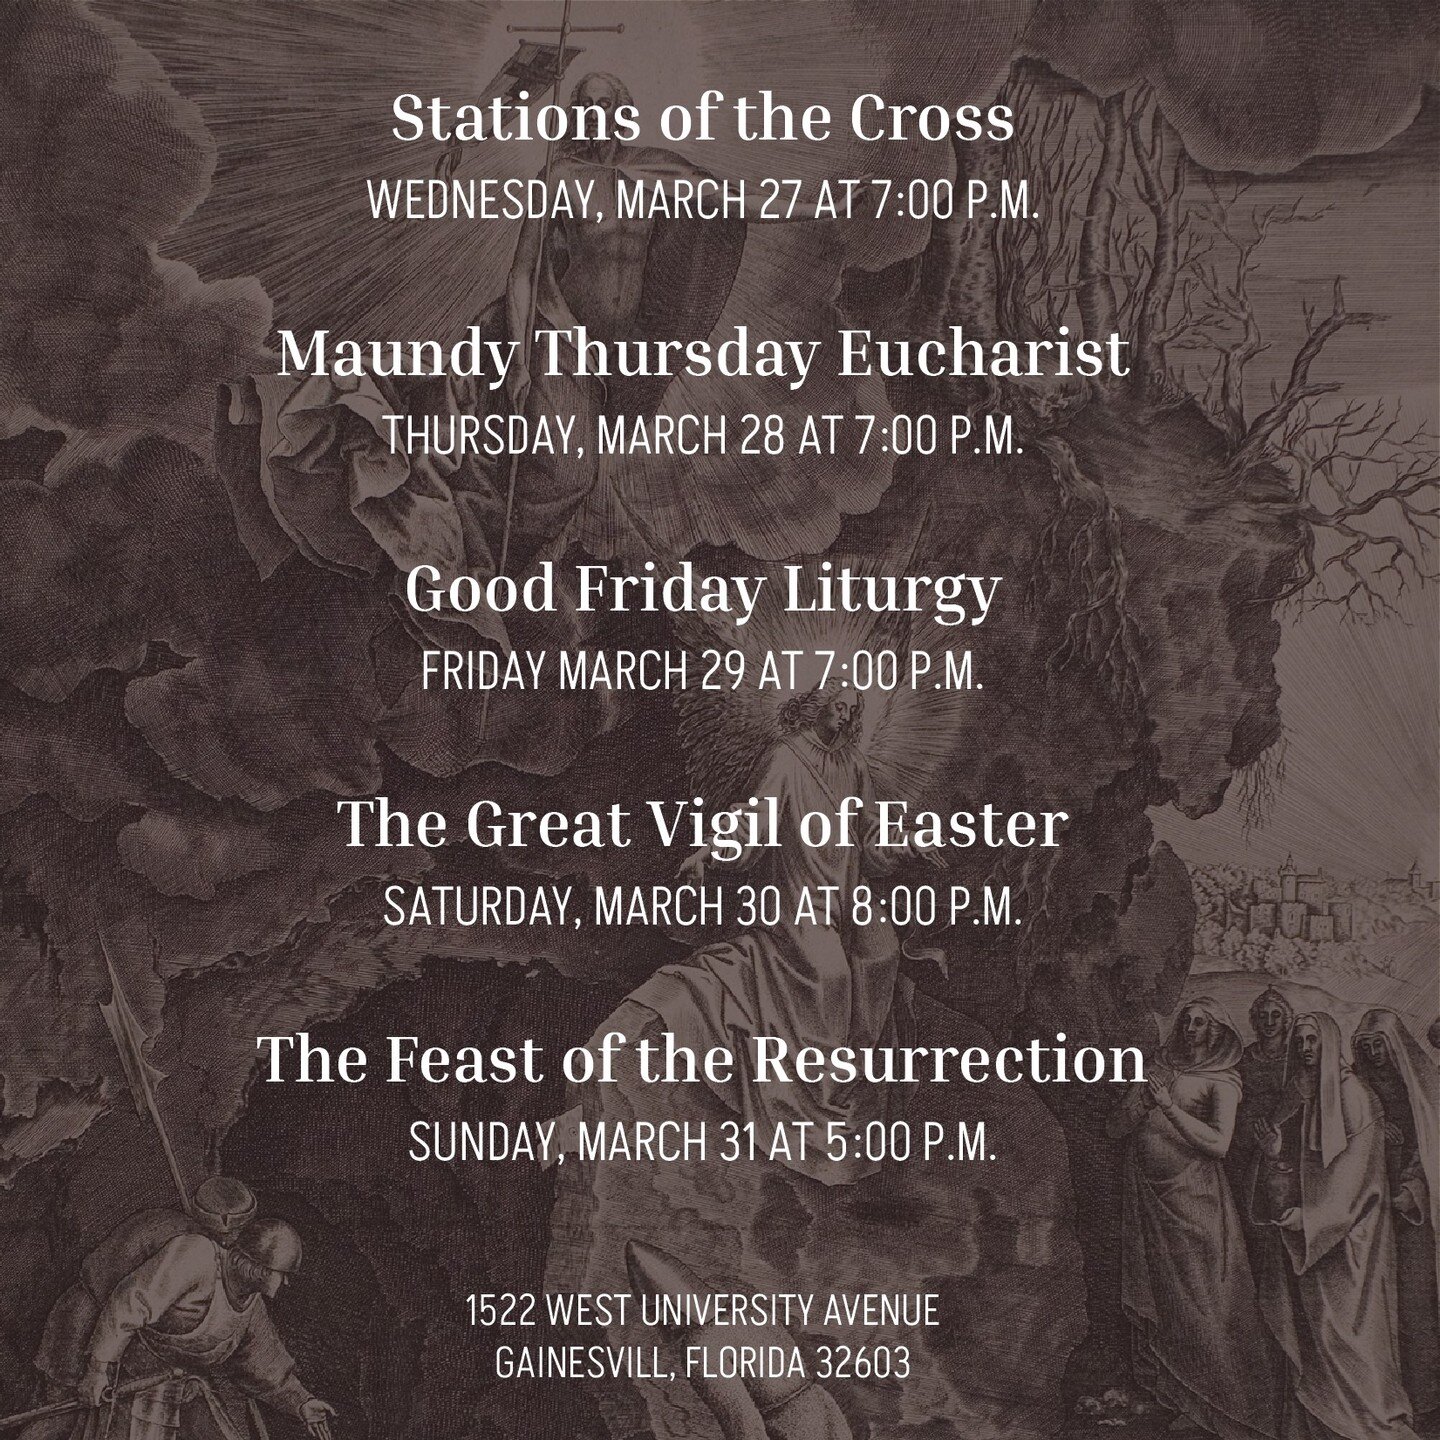 Join us for Holy Week!

- Palm Sunday - Sunday, 3/24 @ 5 p.m.
- Stations of the Cross - Wednesday, 3/27 @ 7 p.m.
- Maundy Thursday - Thursday, 3/28 @ 7 p.m.
- Good Friday - Friday, 3/29 @ 7 p.m.
- Easter Vigil* - Saturday, 3/30 @ 8 p.m.
- Easter Sund